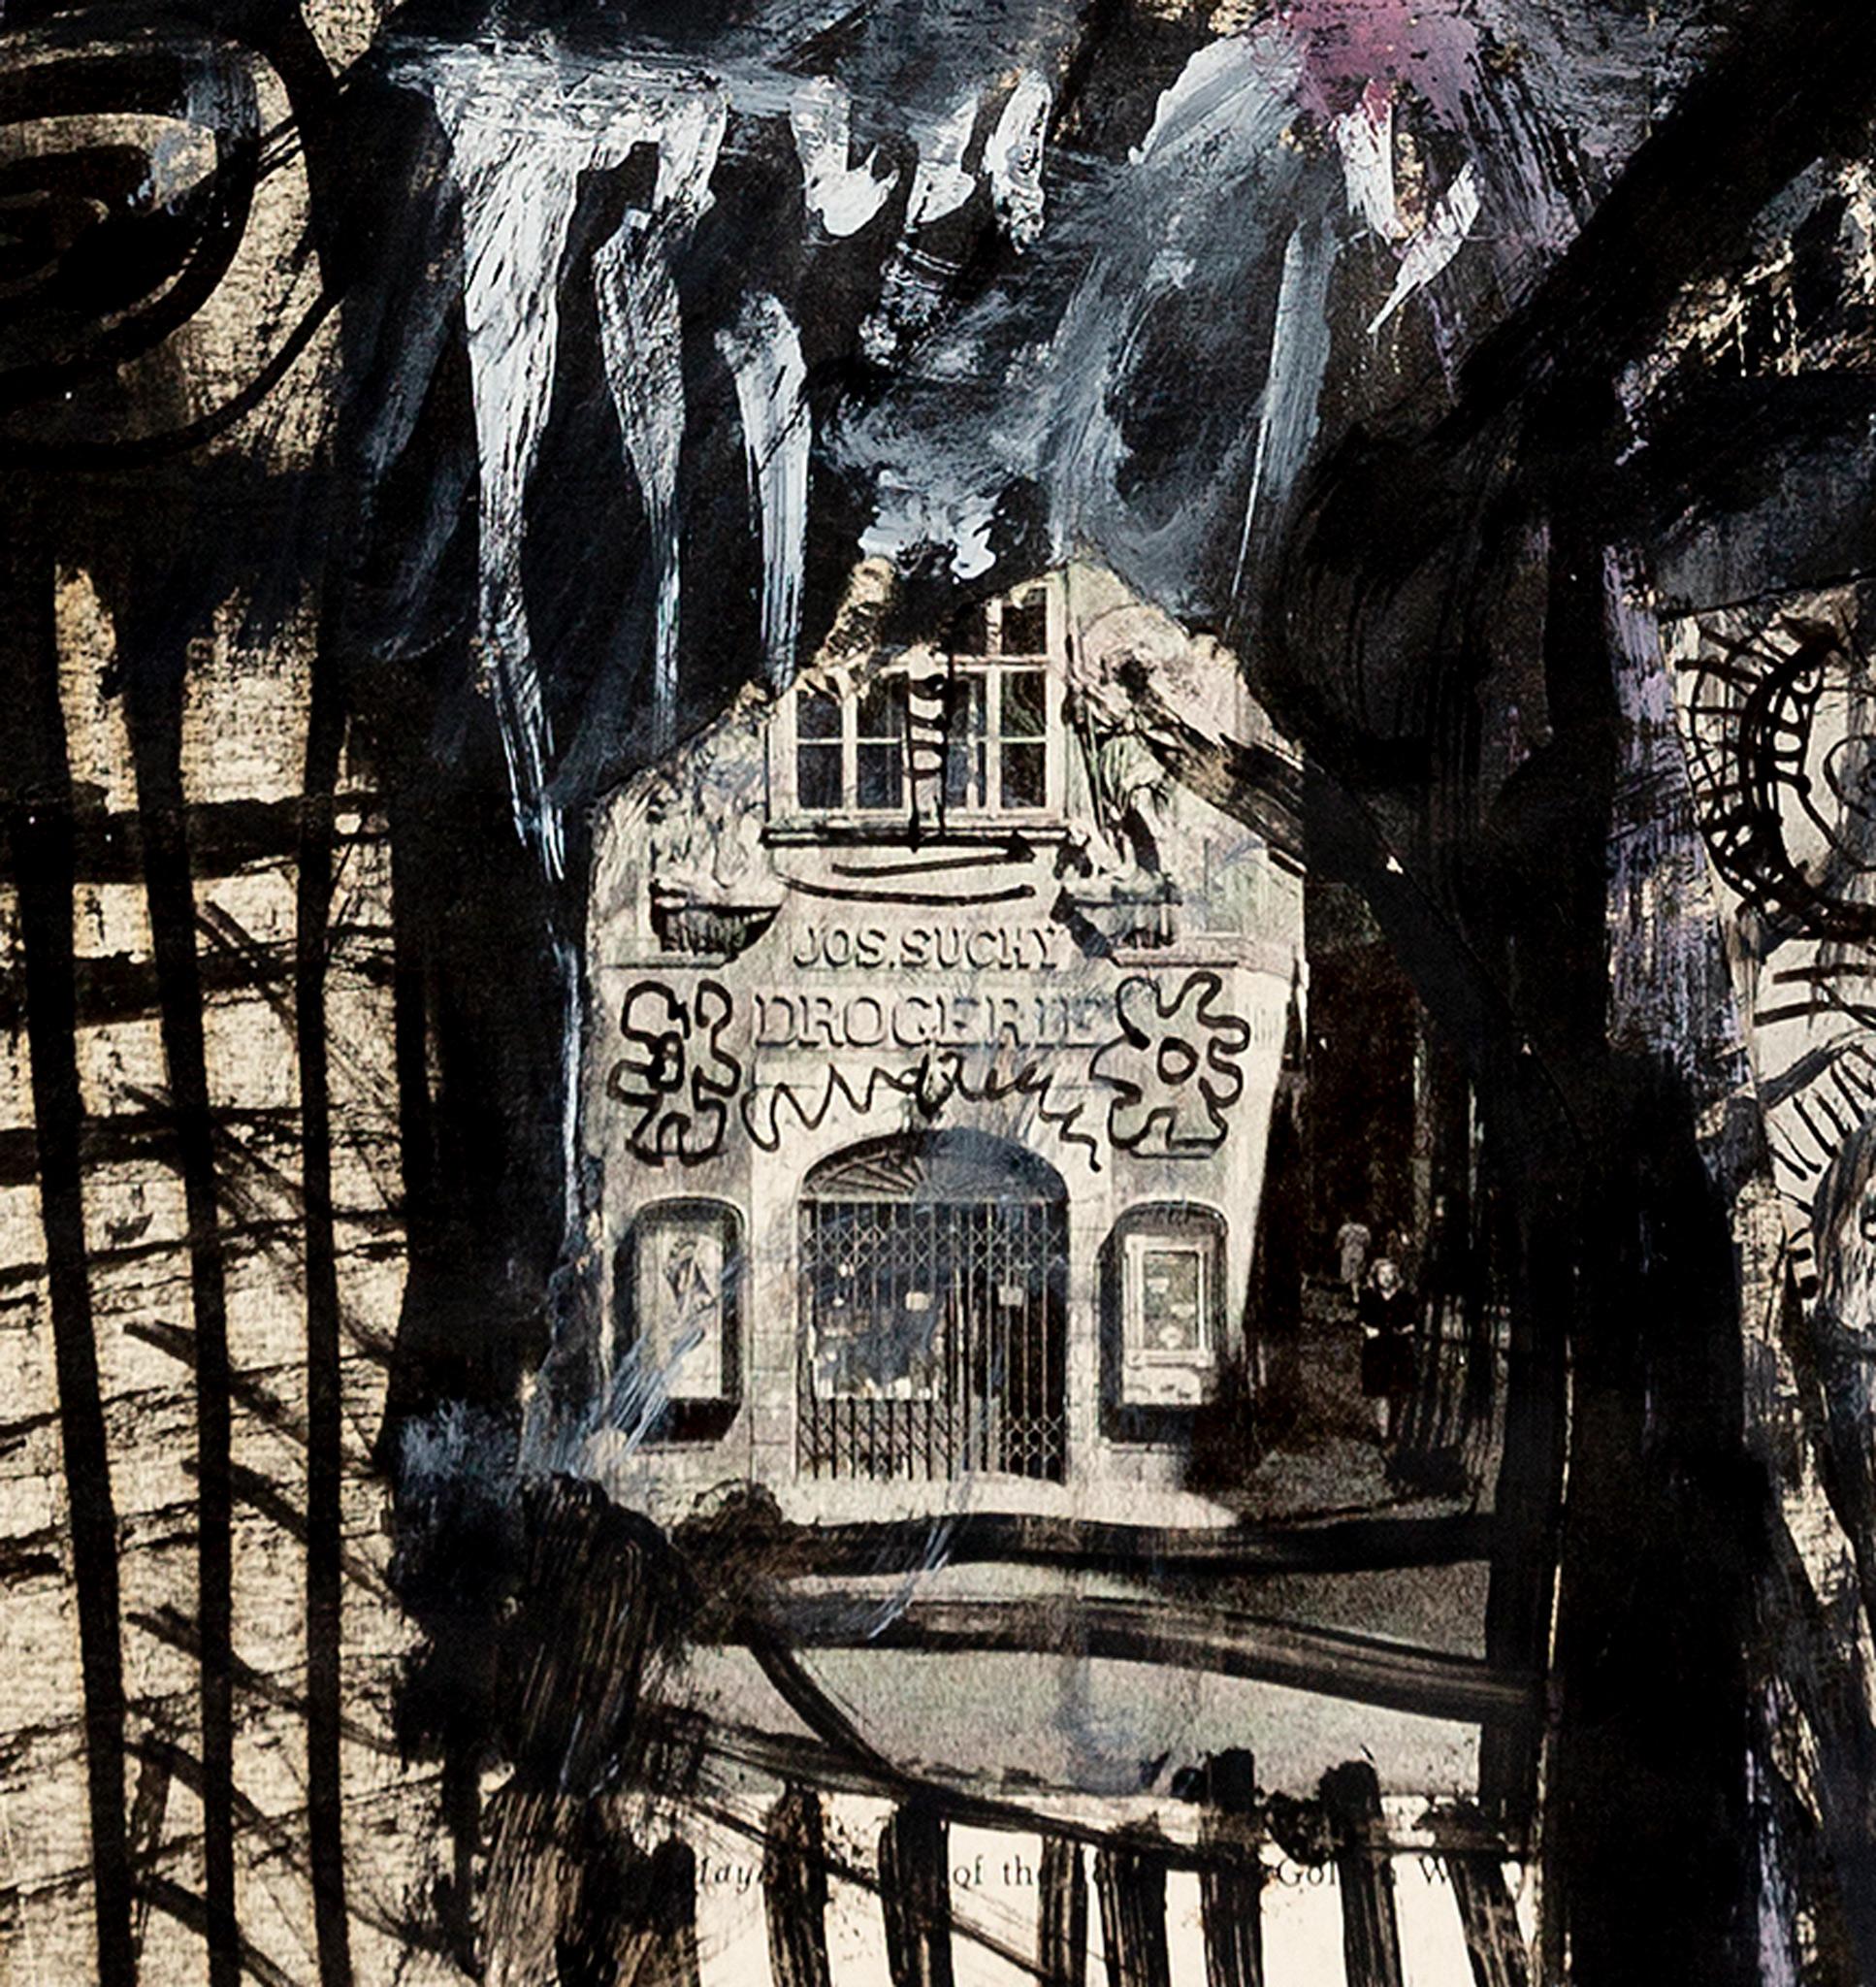 chaotic painting with heavy black lines outlining architectural forms and a black and white photo collaged into the painting